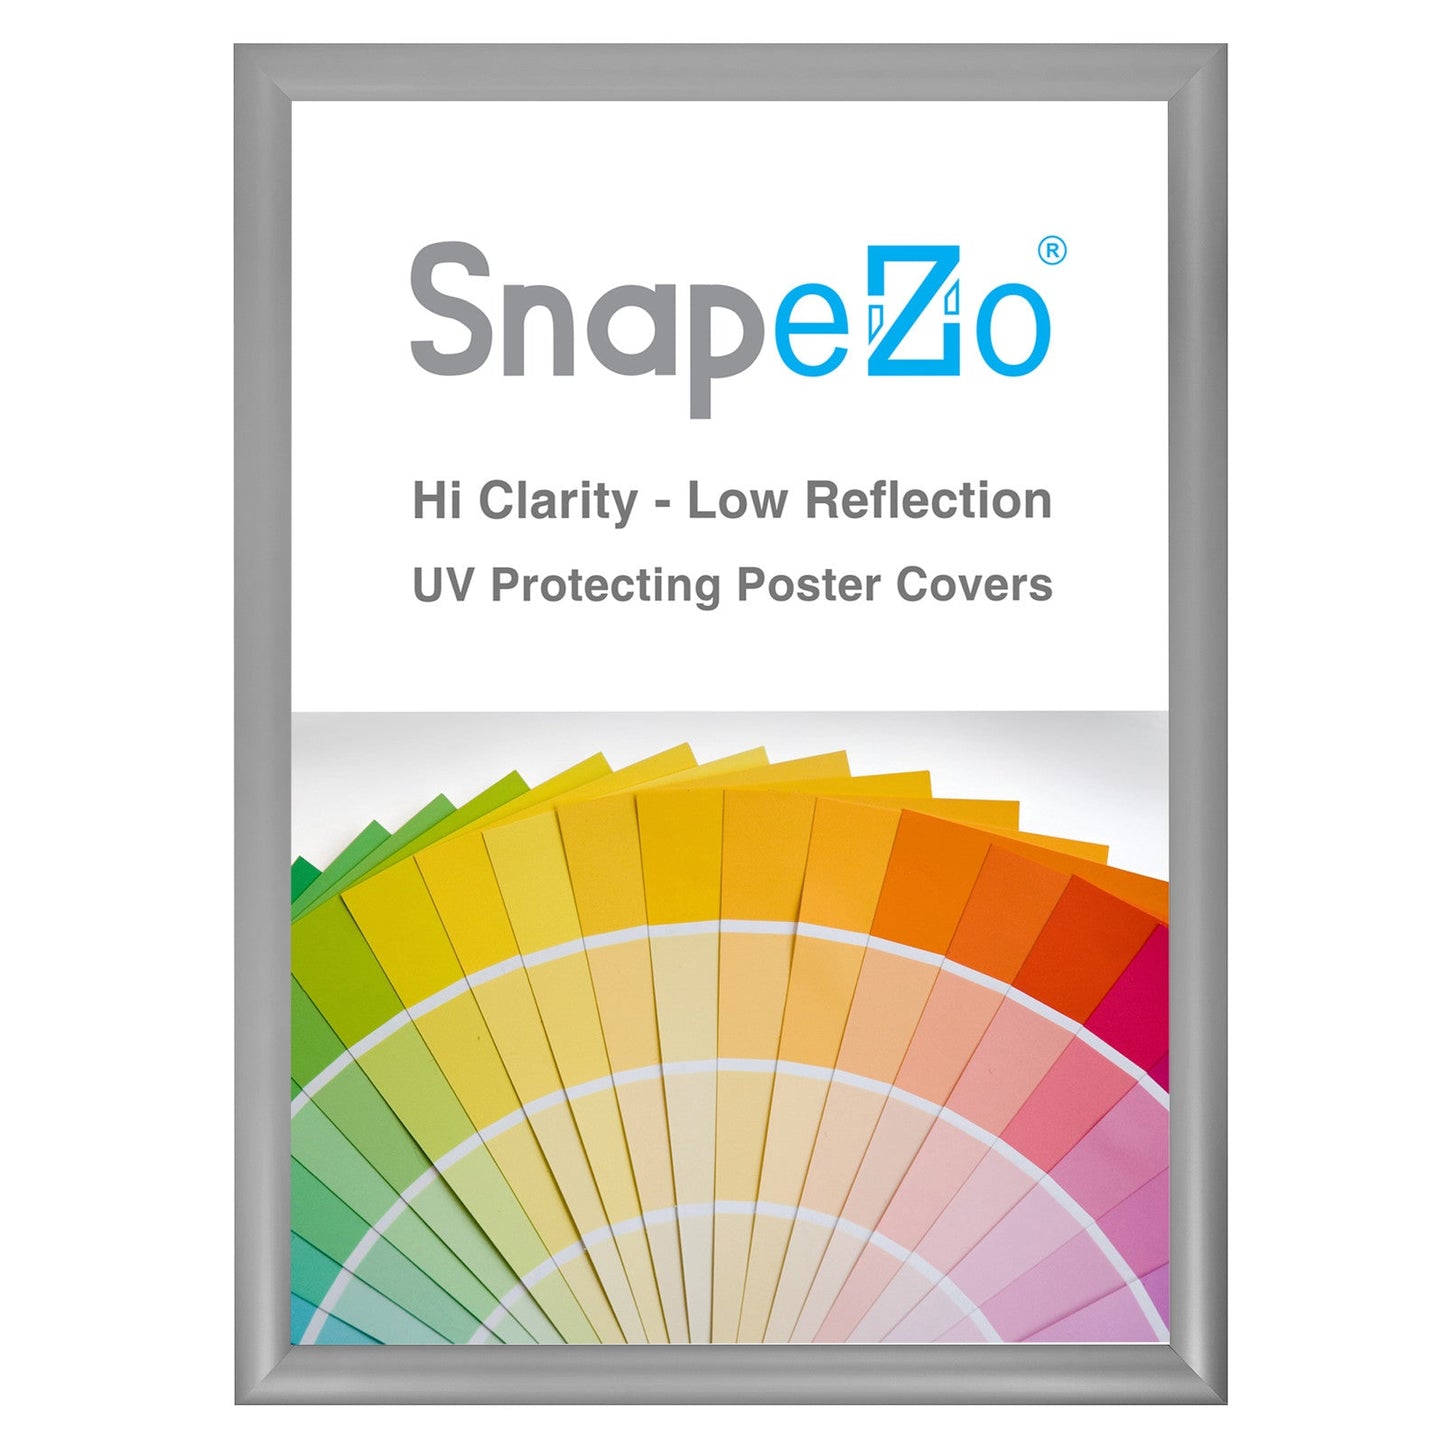 Load image into Gallery viewer, 14x20 Silver SnapeZo® Snap Frame - 1.2&amp;quot; Profile
